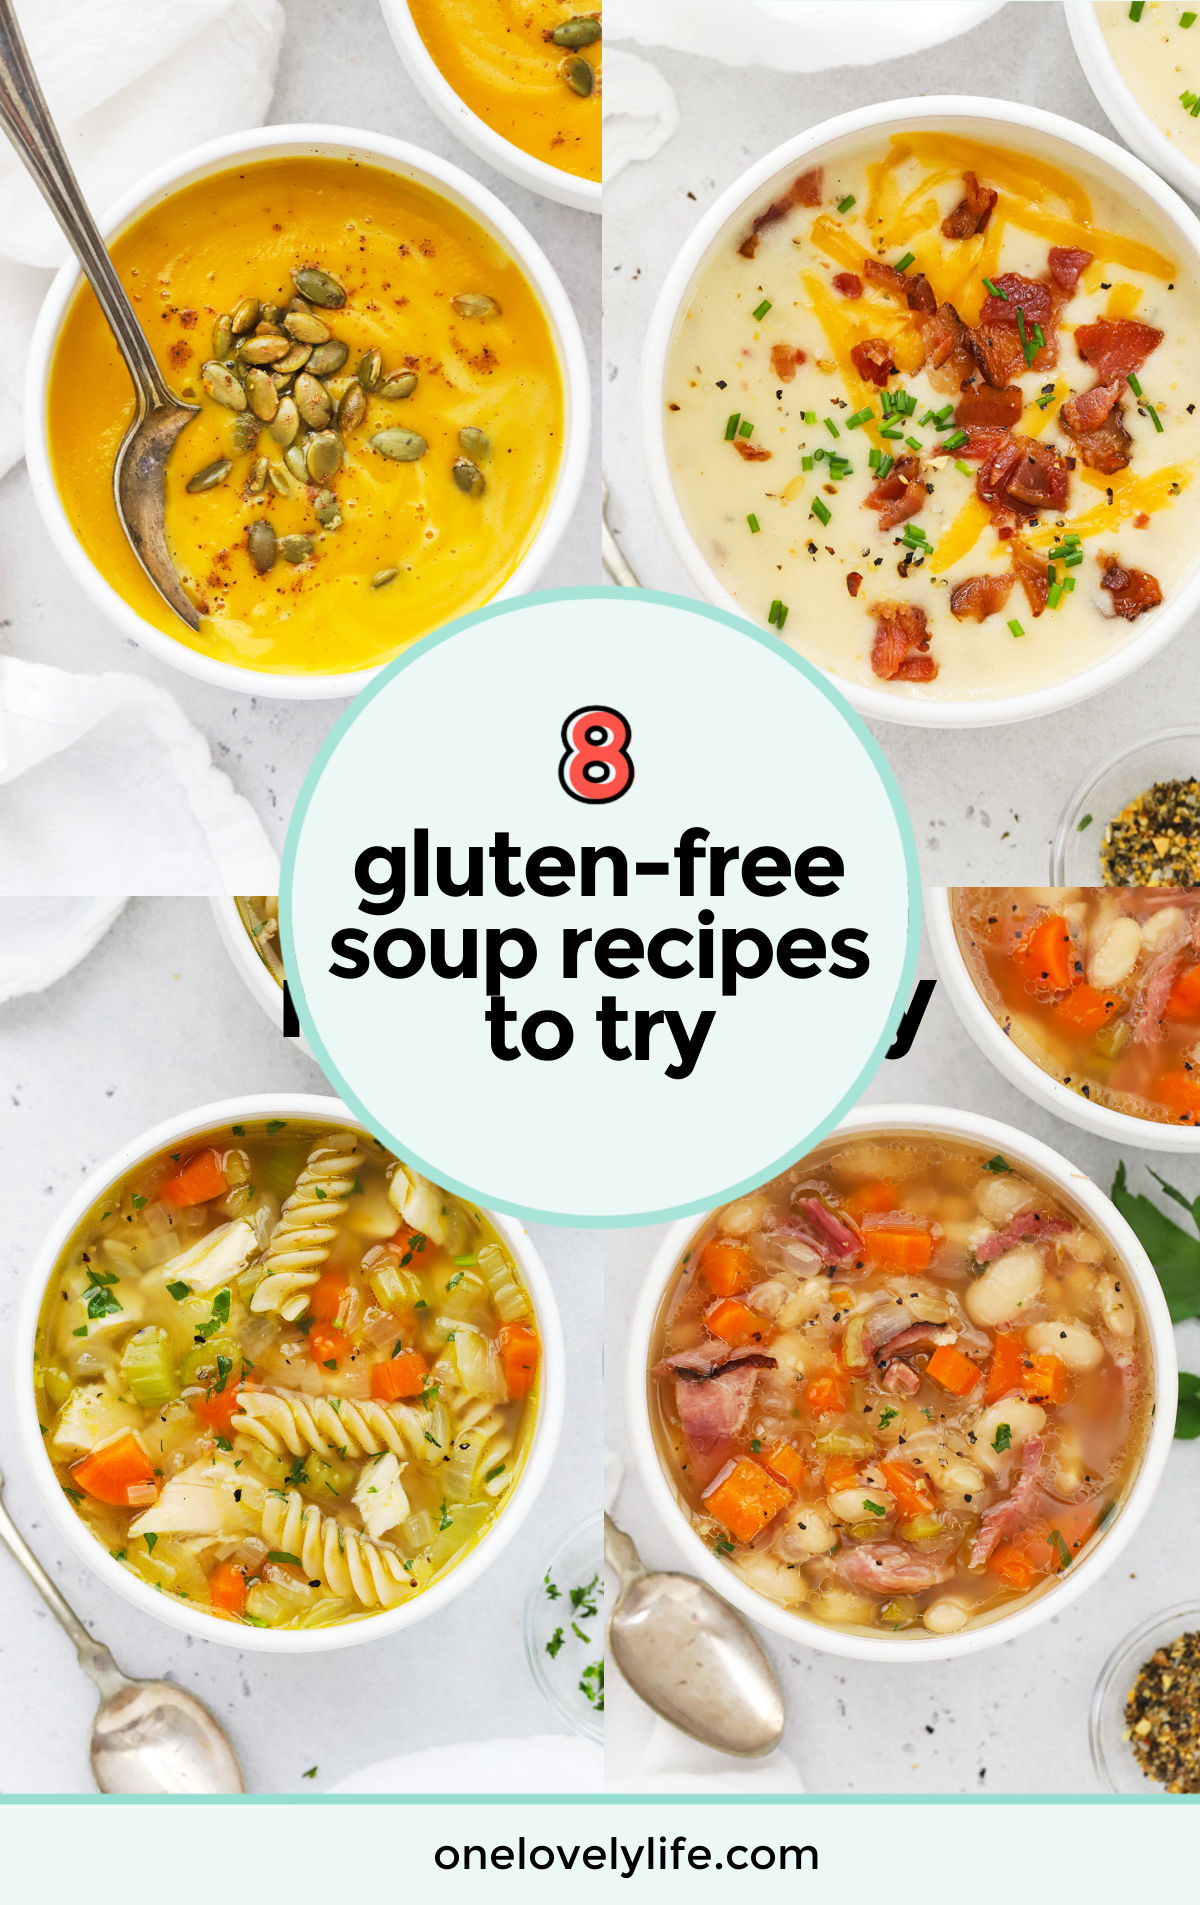 Love a cozy bowl of soup? You're in the right place! We rounded up 15+ of our most popular & best gluten-free soup recipes for your next soup craving! // gluten-free soup to try / healthy gluten-free soup recipes / healthy soup recipes / healthy soups / meal plan ideas / gluten-free meal plan / popular gluten-free soup recipes / the best gluten-free soup recipes